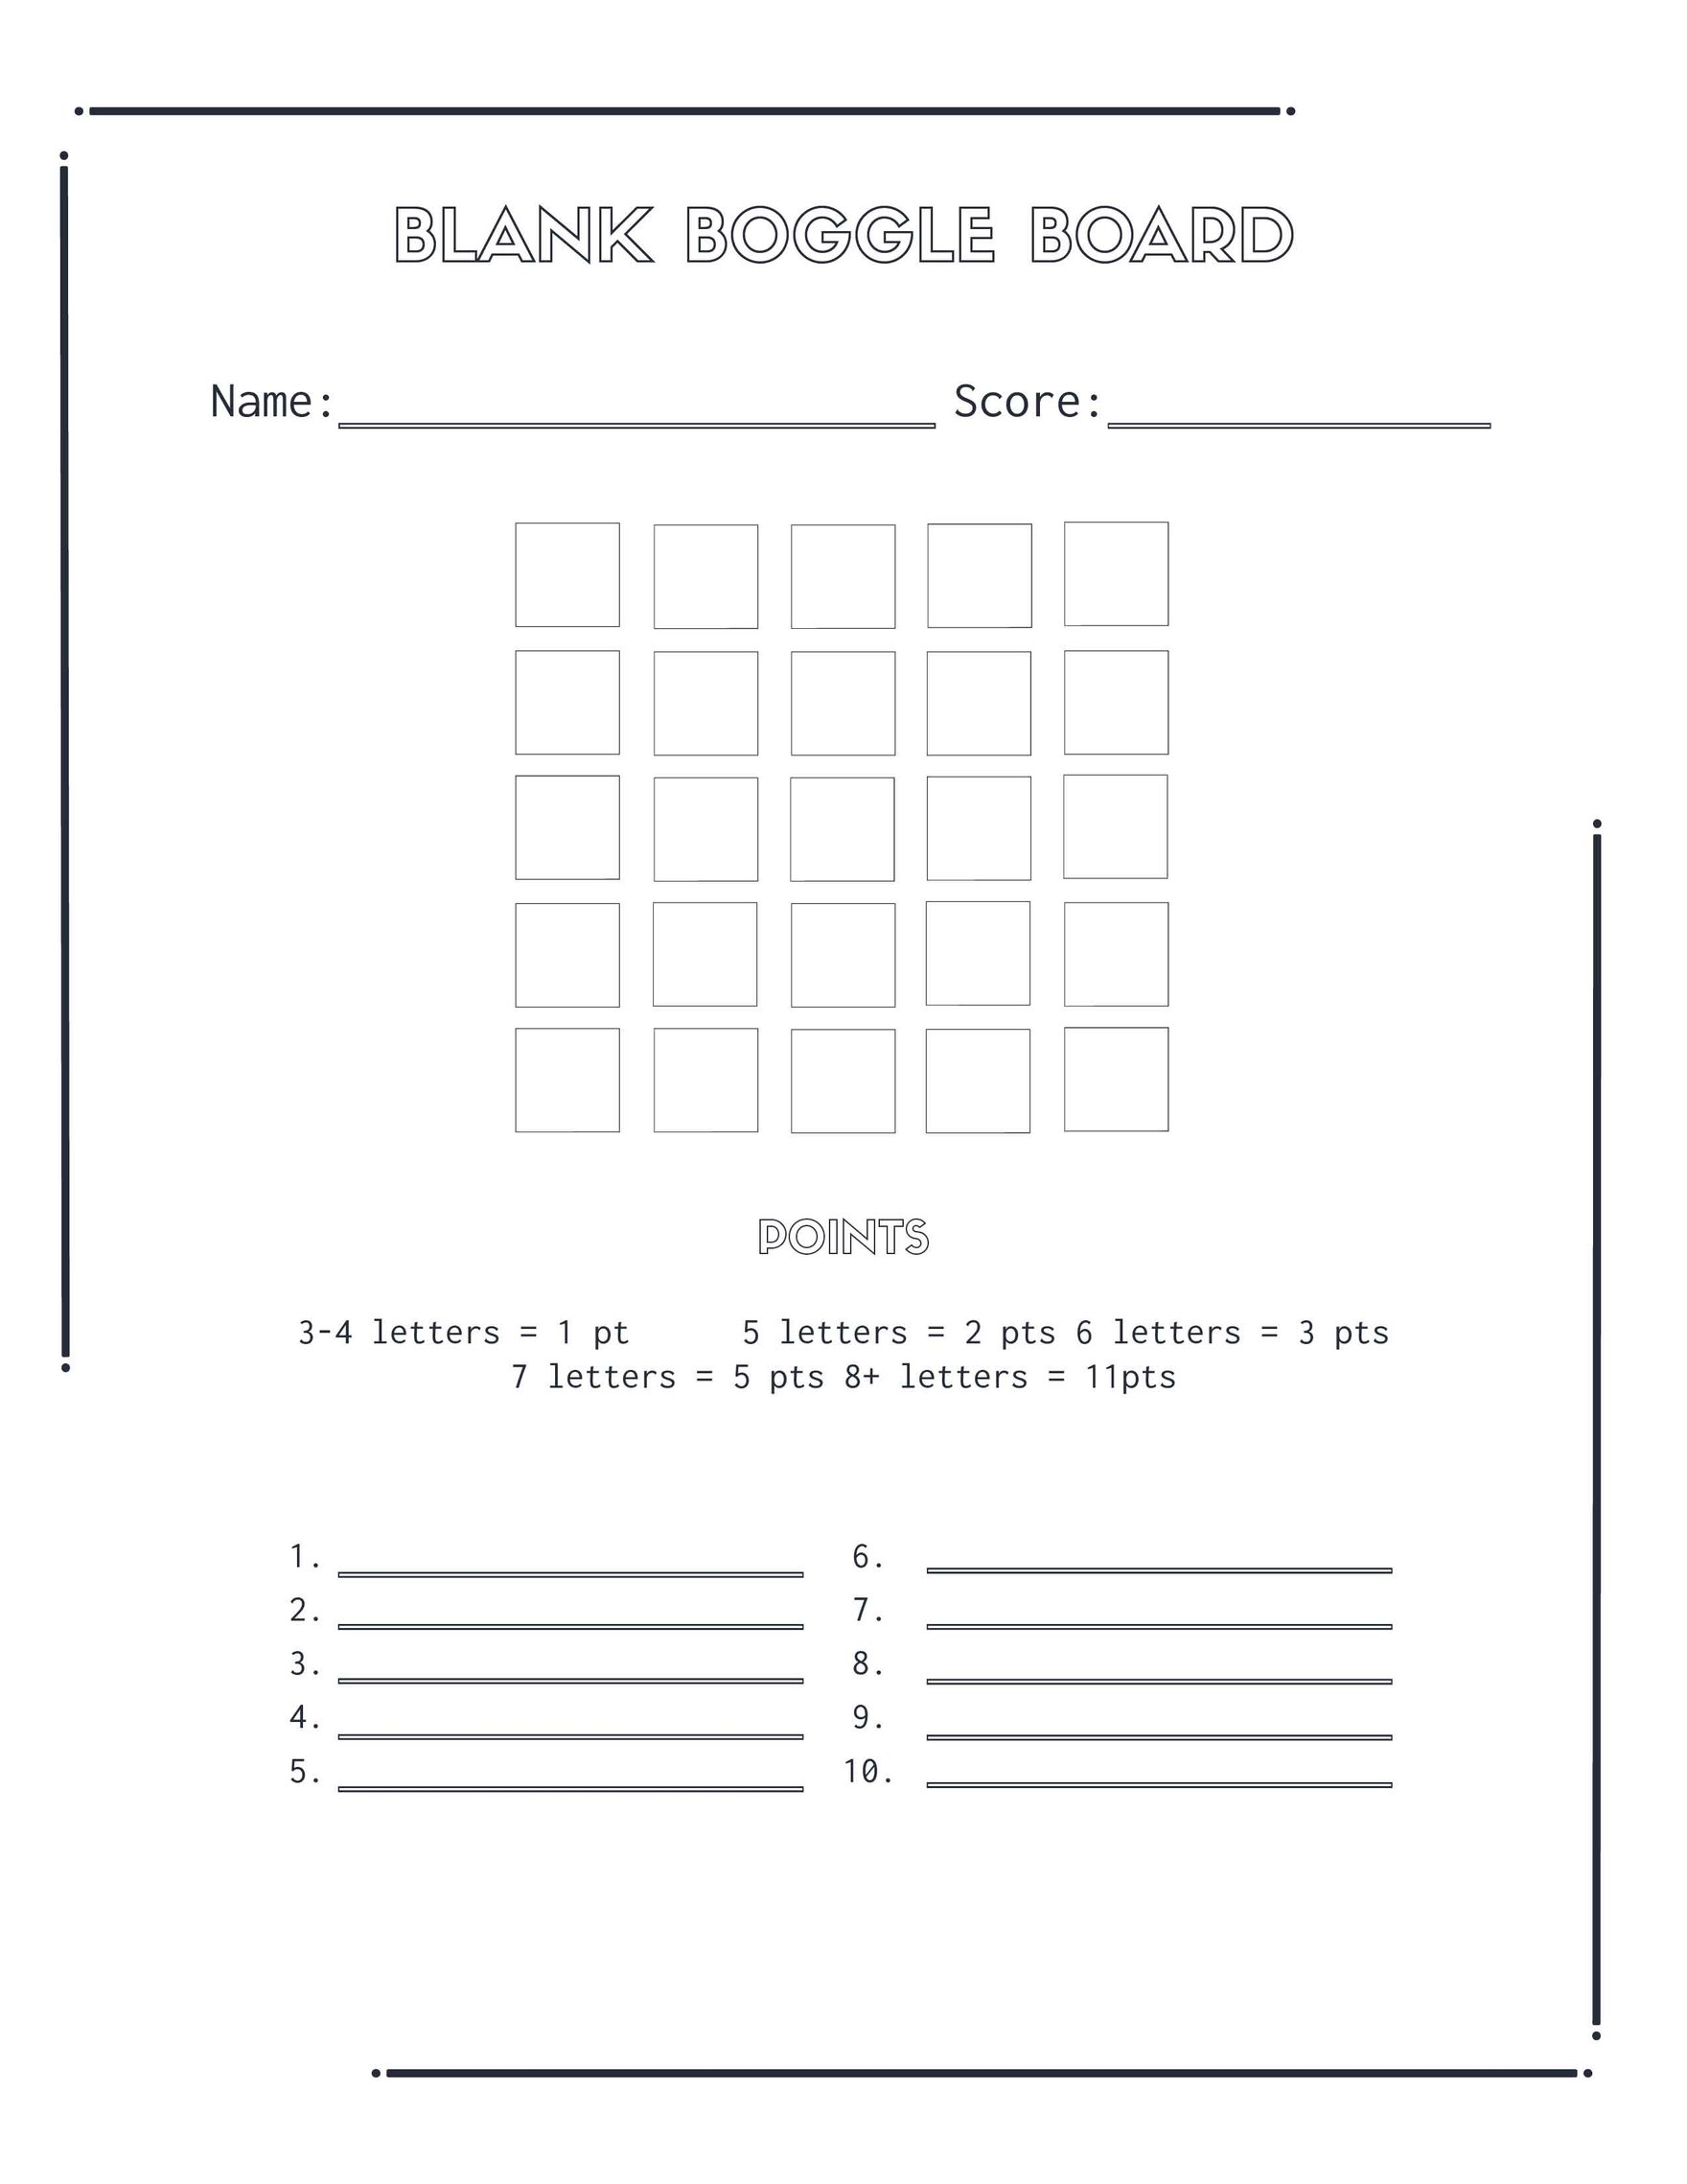 Free Blank Boggle Board Template in Word, Google Docs, PDF, Apple Pages